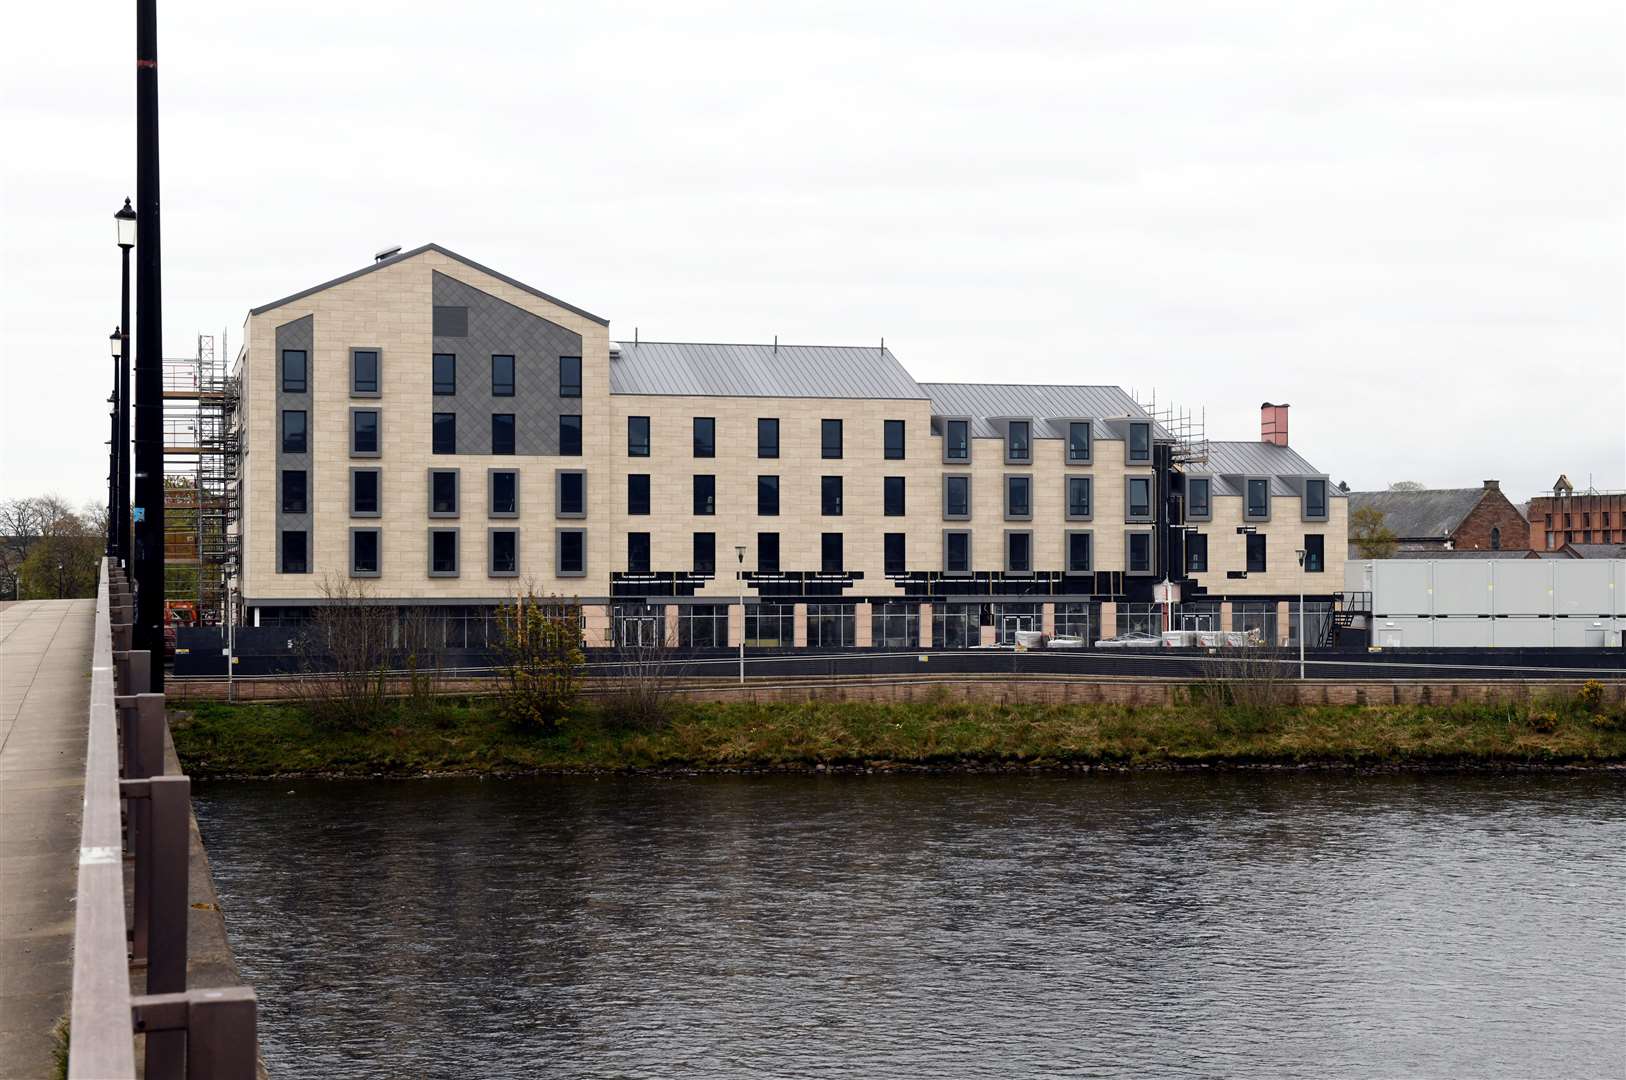 The Glebe Street building occupies a commanding site overlooking the River Ness. Picture: James Mackenzie.